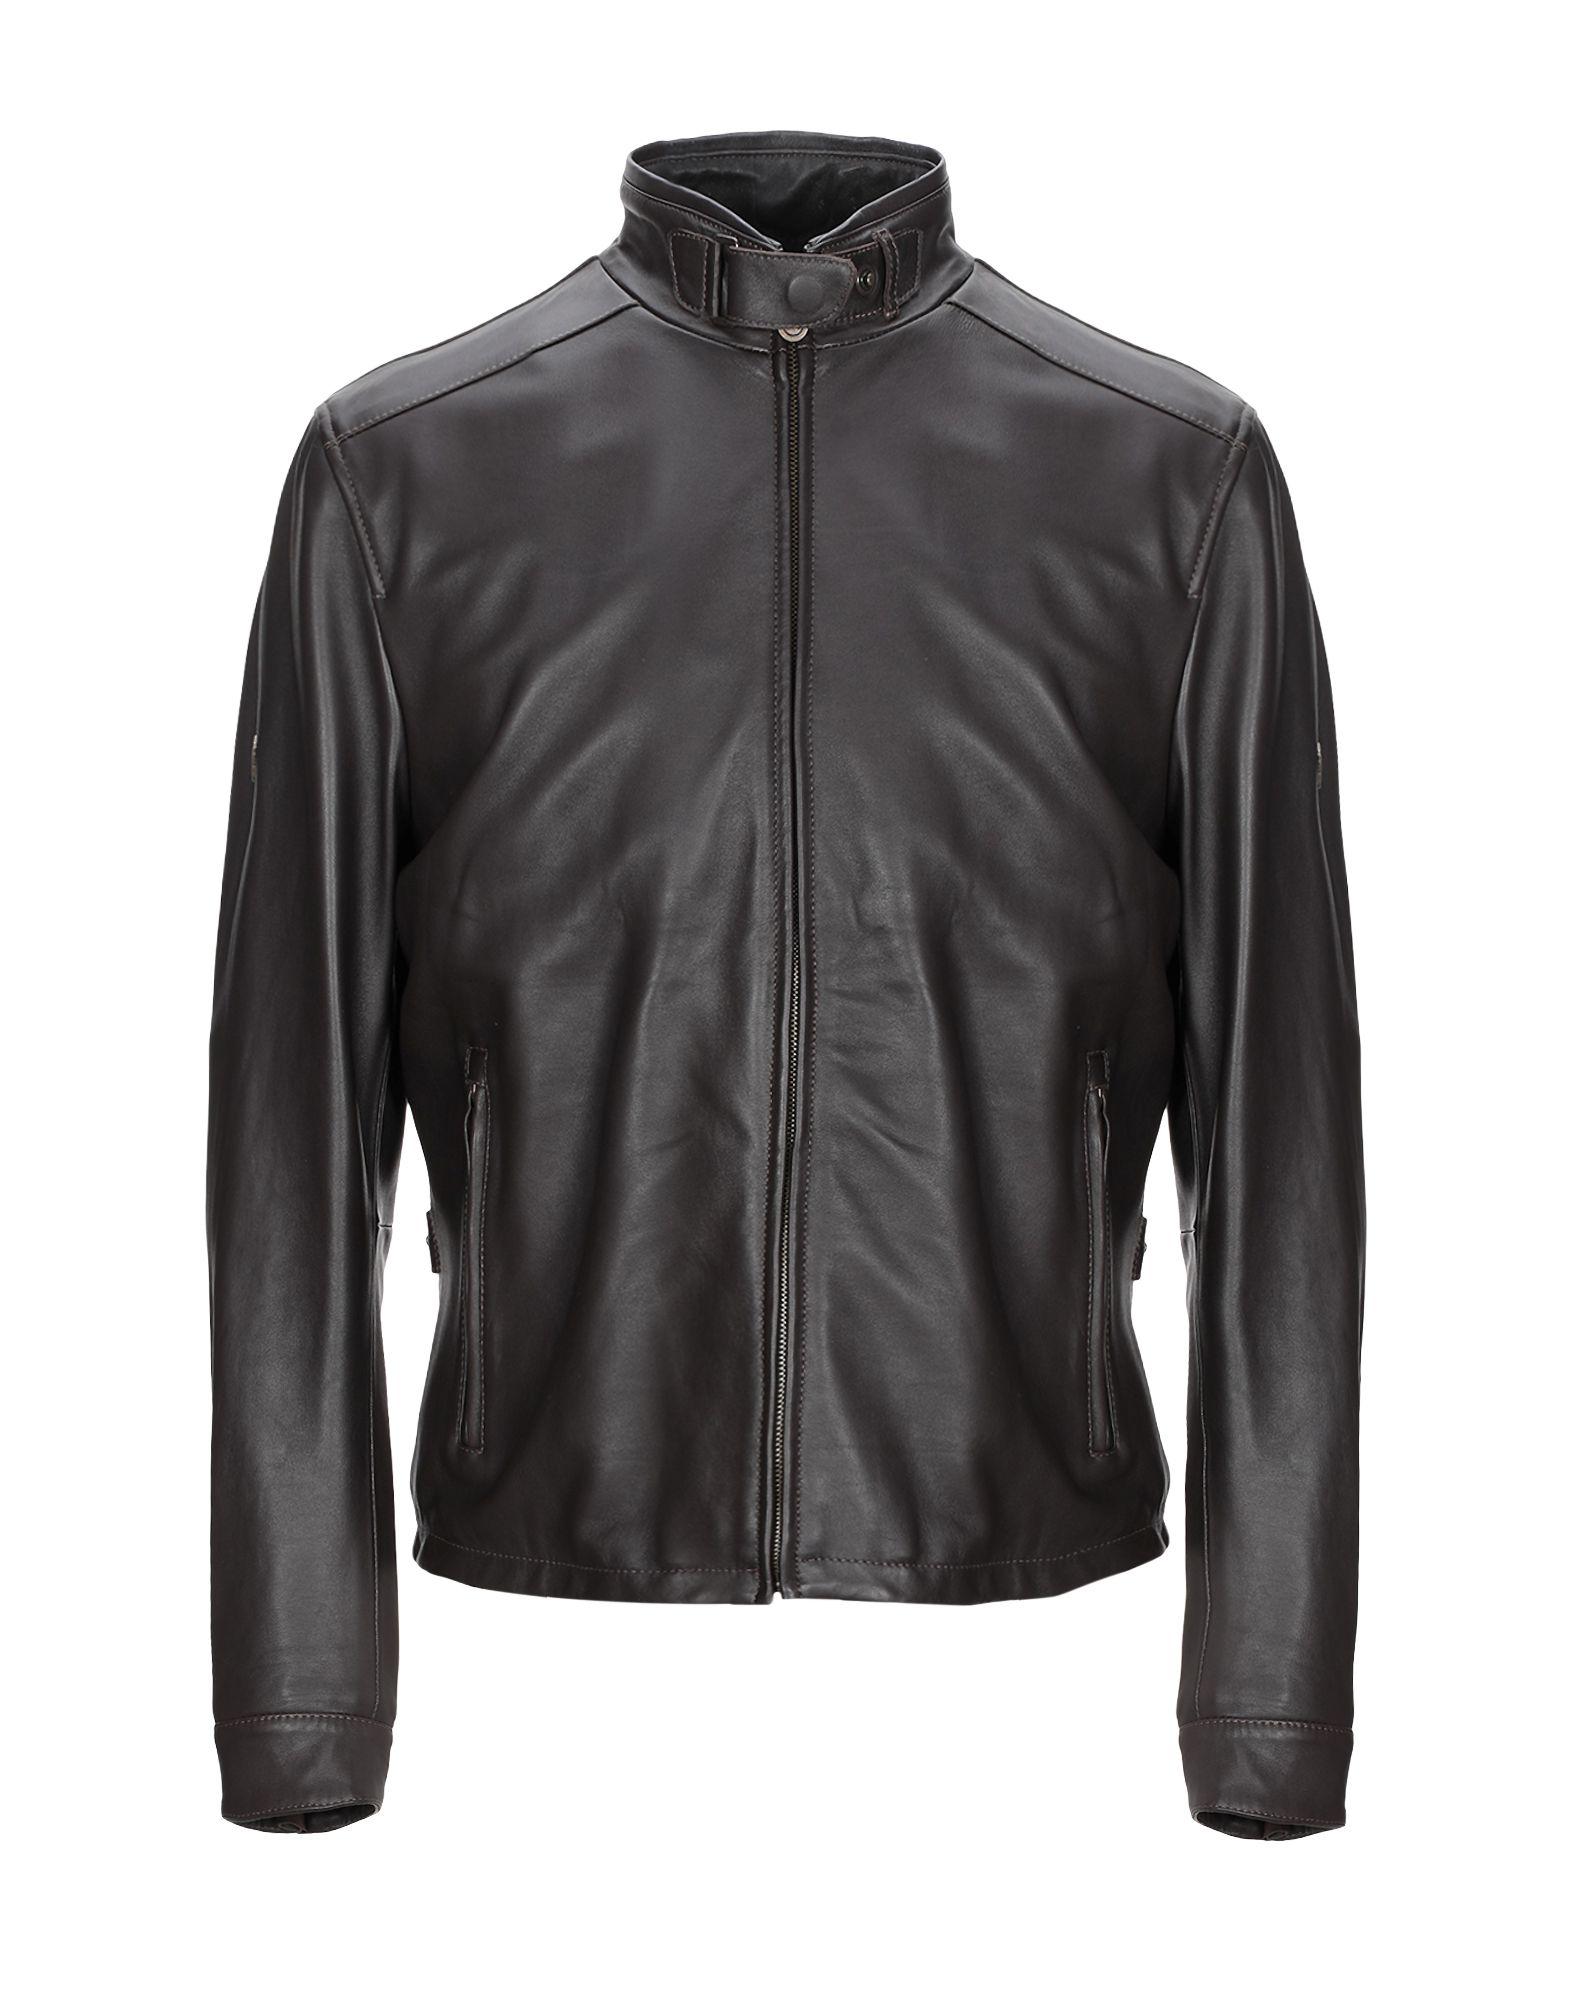 Matchless Leather Jacket in Dark Brown (Brown) for Men - Lyst